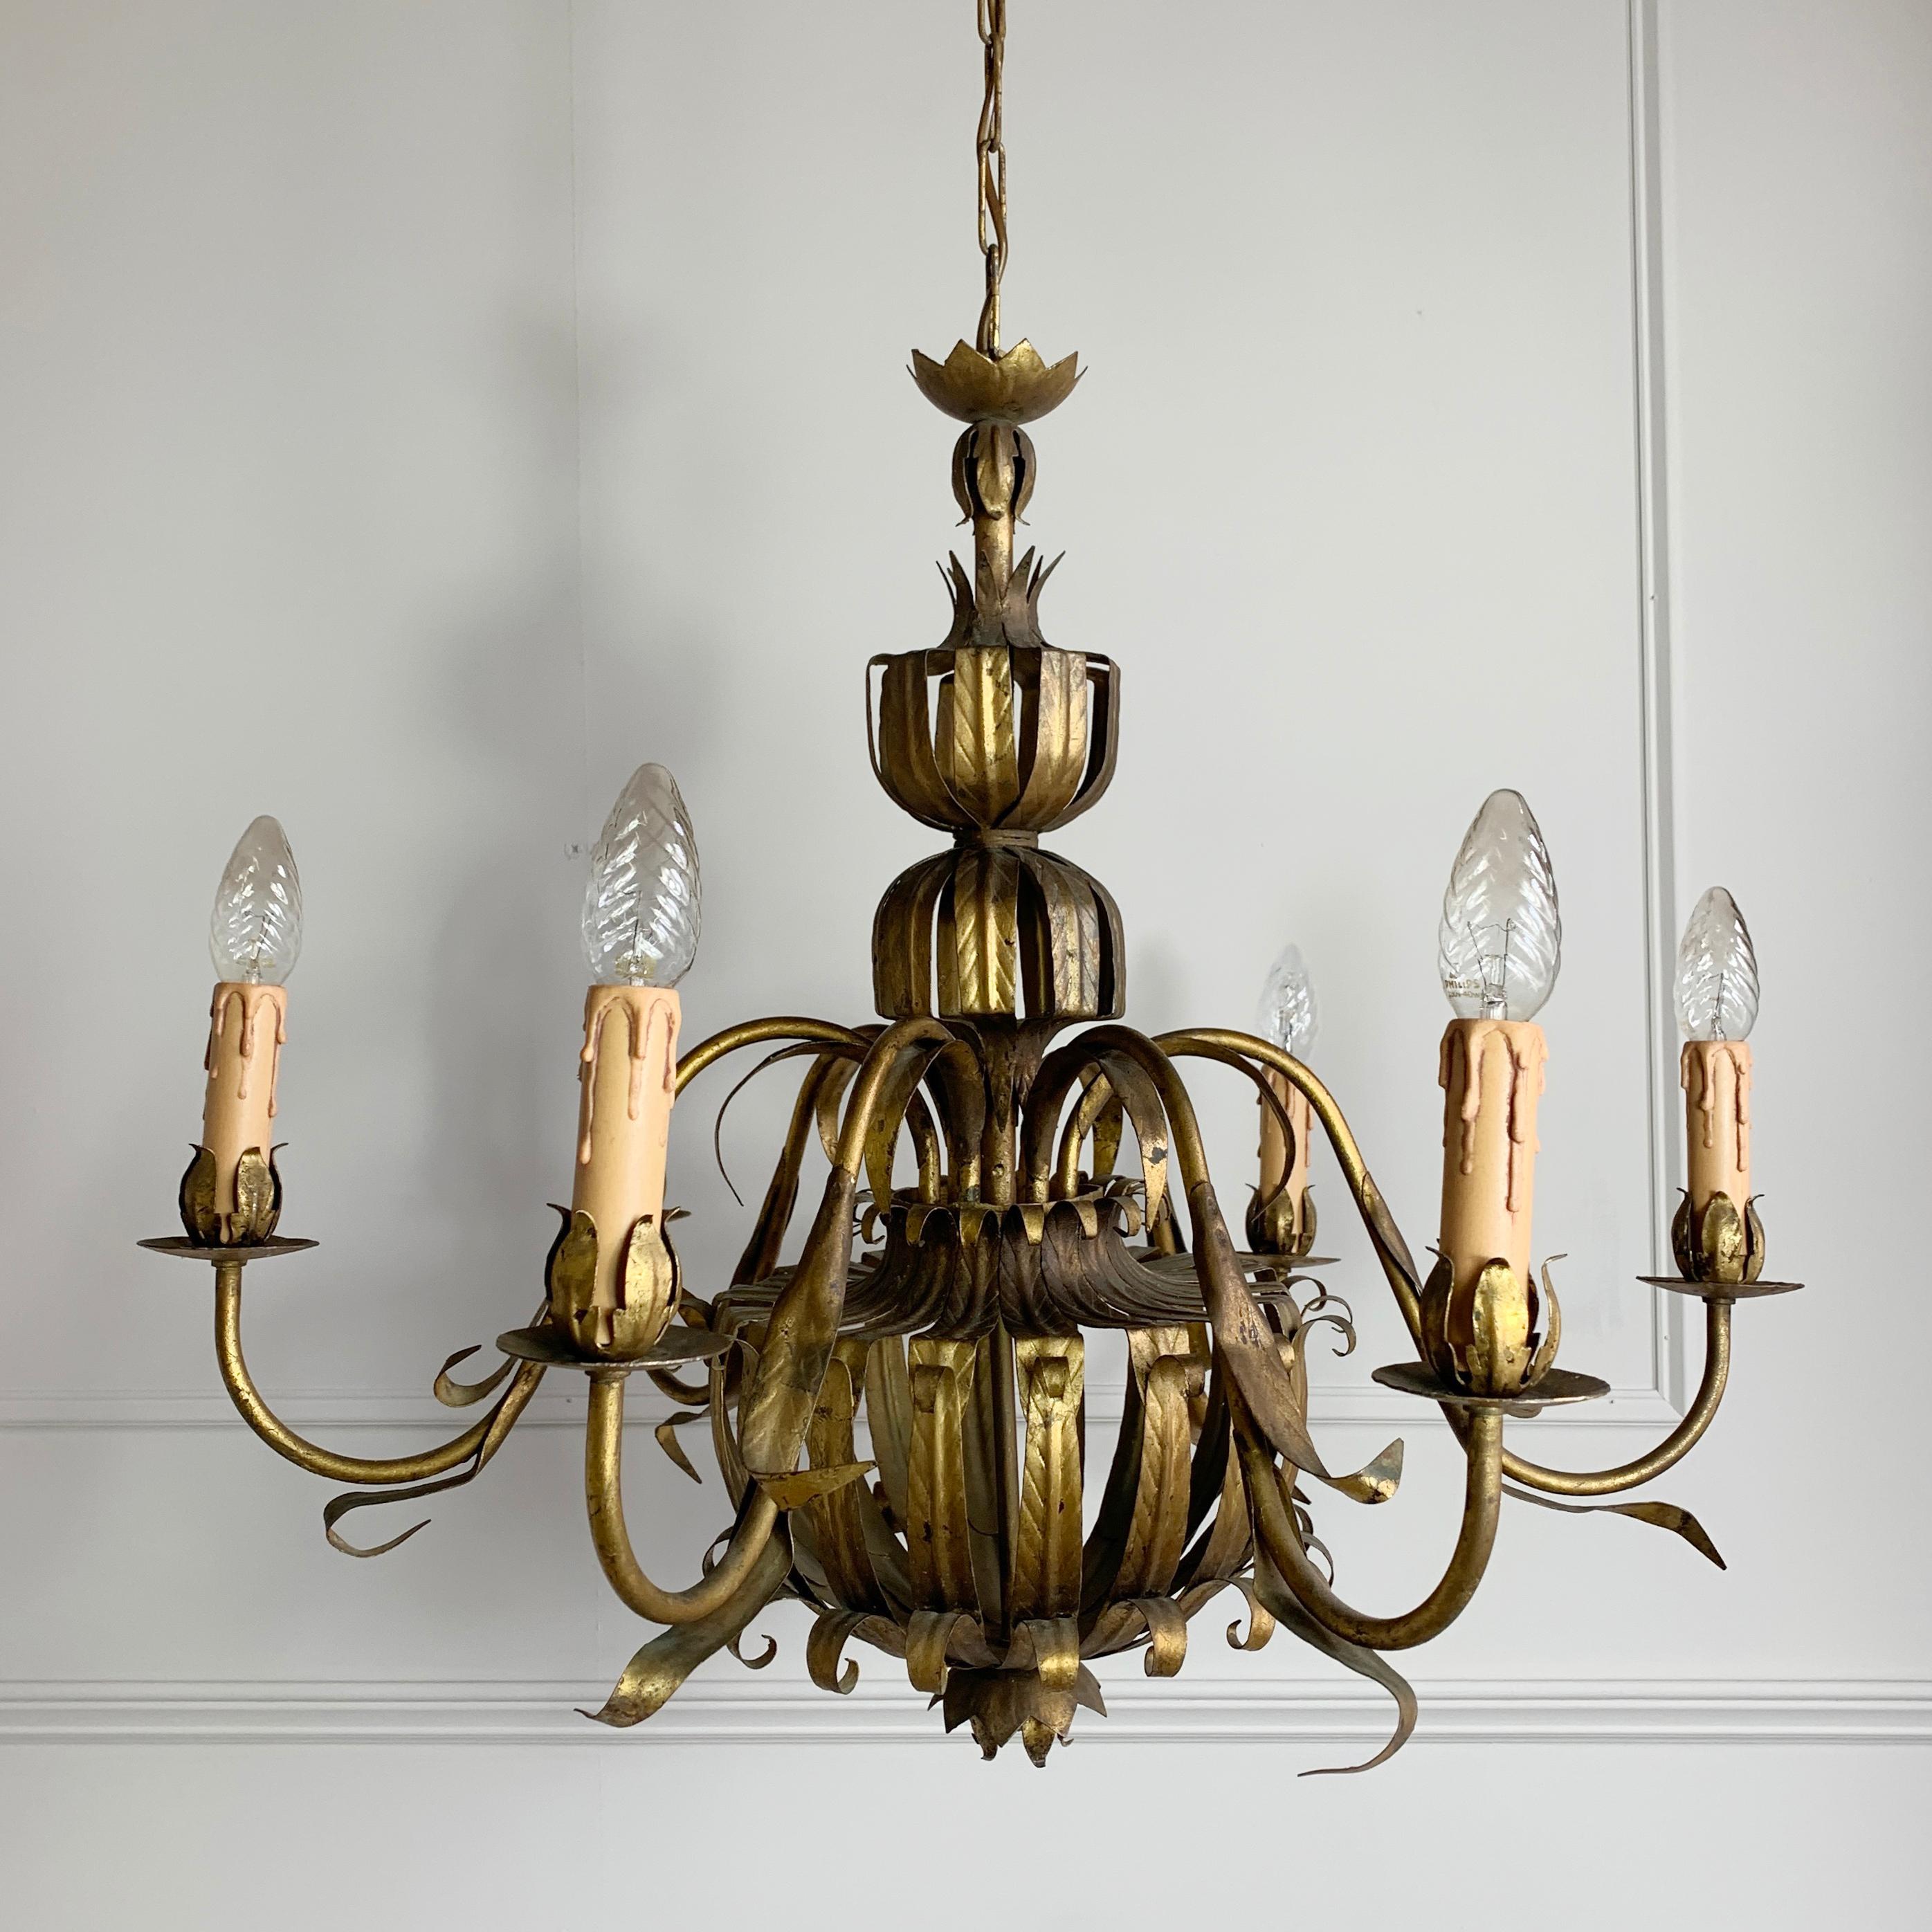 Spanish Mid Century gilt, handcrafted metal chandelier
Attributed to Ferro art, the characteristics of the flower bud lamp cups and the linear detail on the leaves is consistent to their design
This is a large sized chandelier, featured a superb